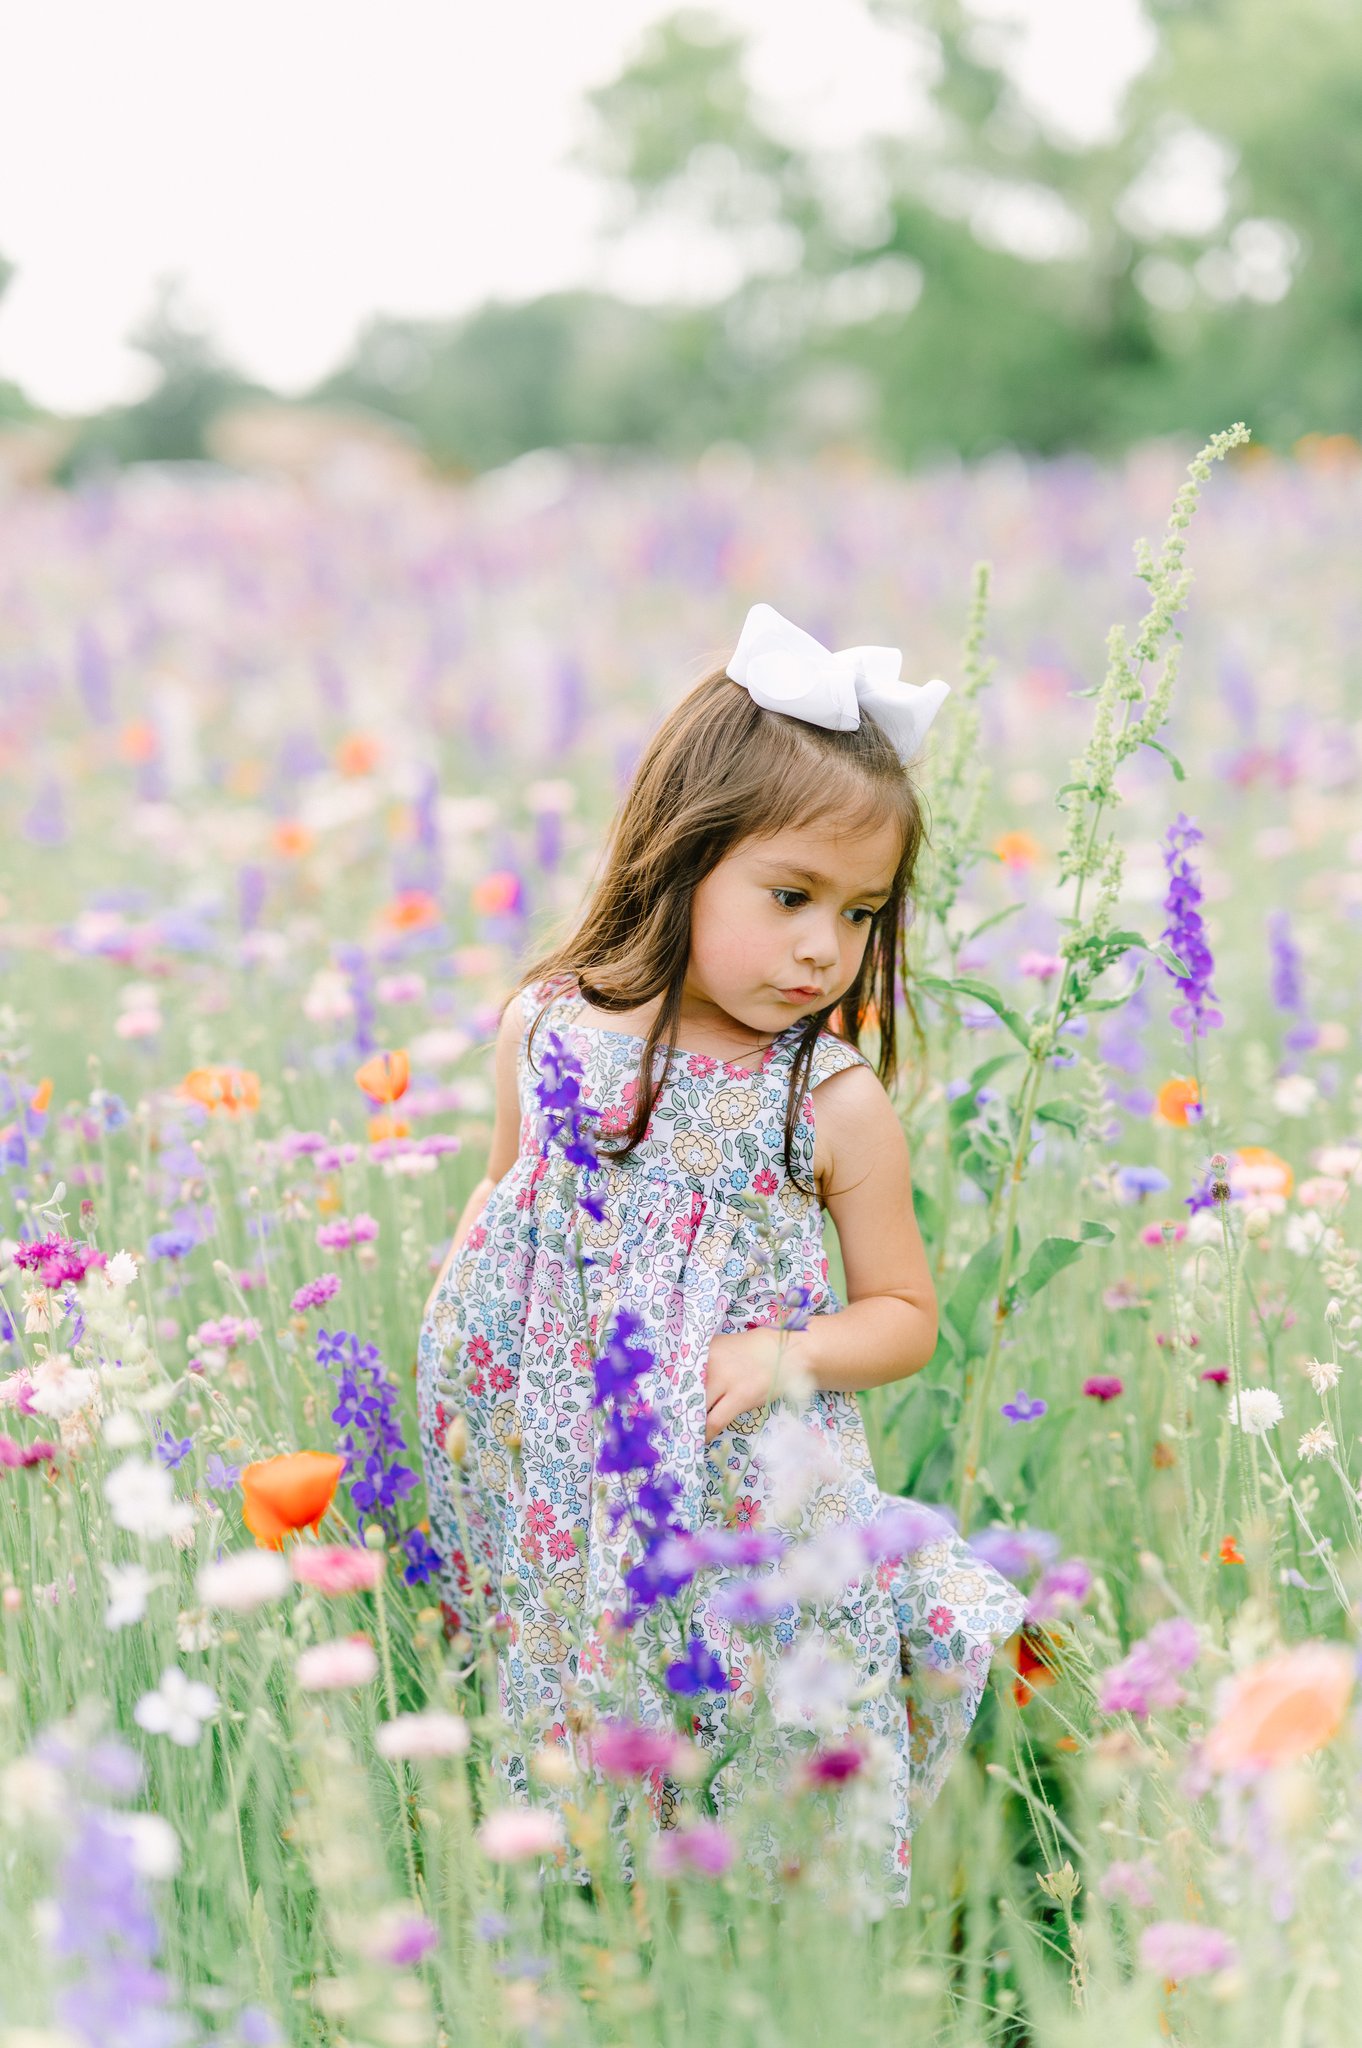 Young girl looking over her shoulder in a flower field near Highland Park.